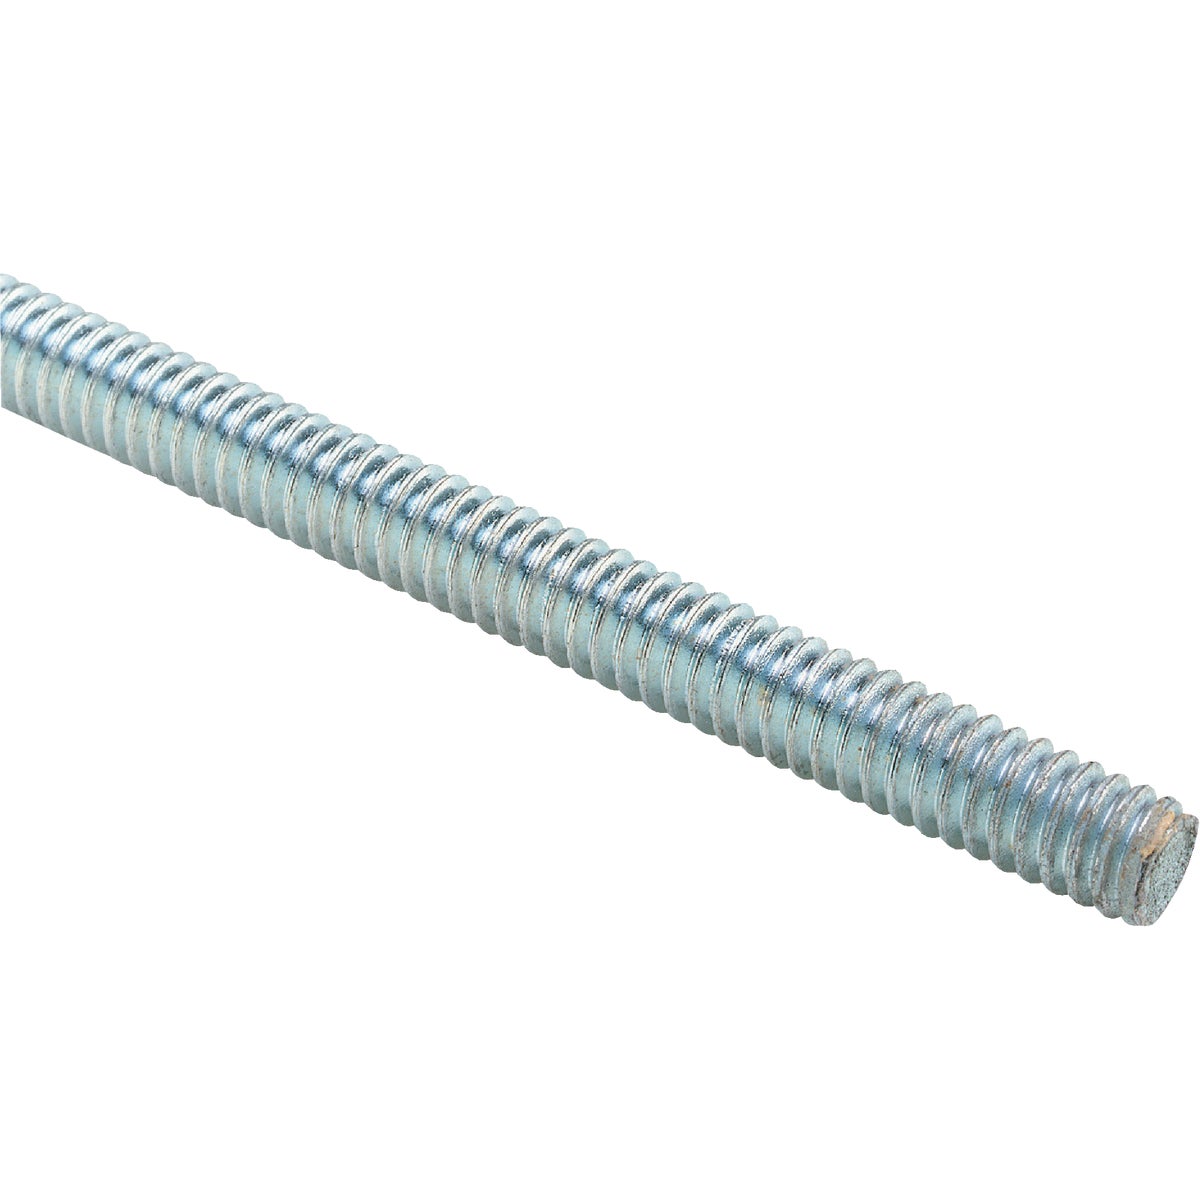 Superstrut 1/2 In.-13 x 10 Ft. Continuous Thread Threaded Rod